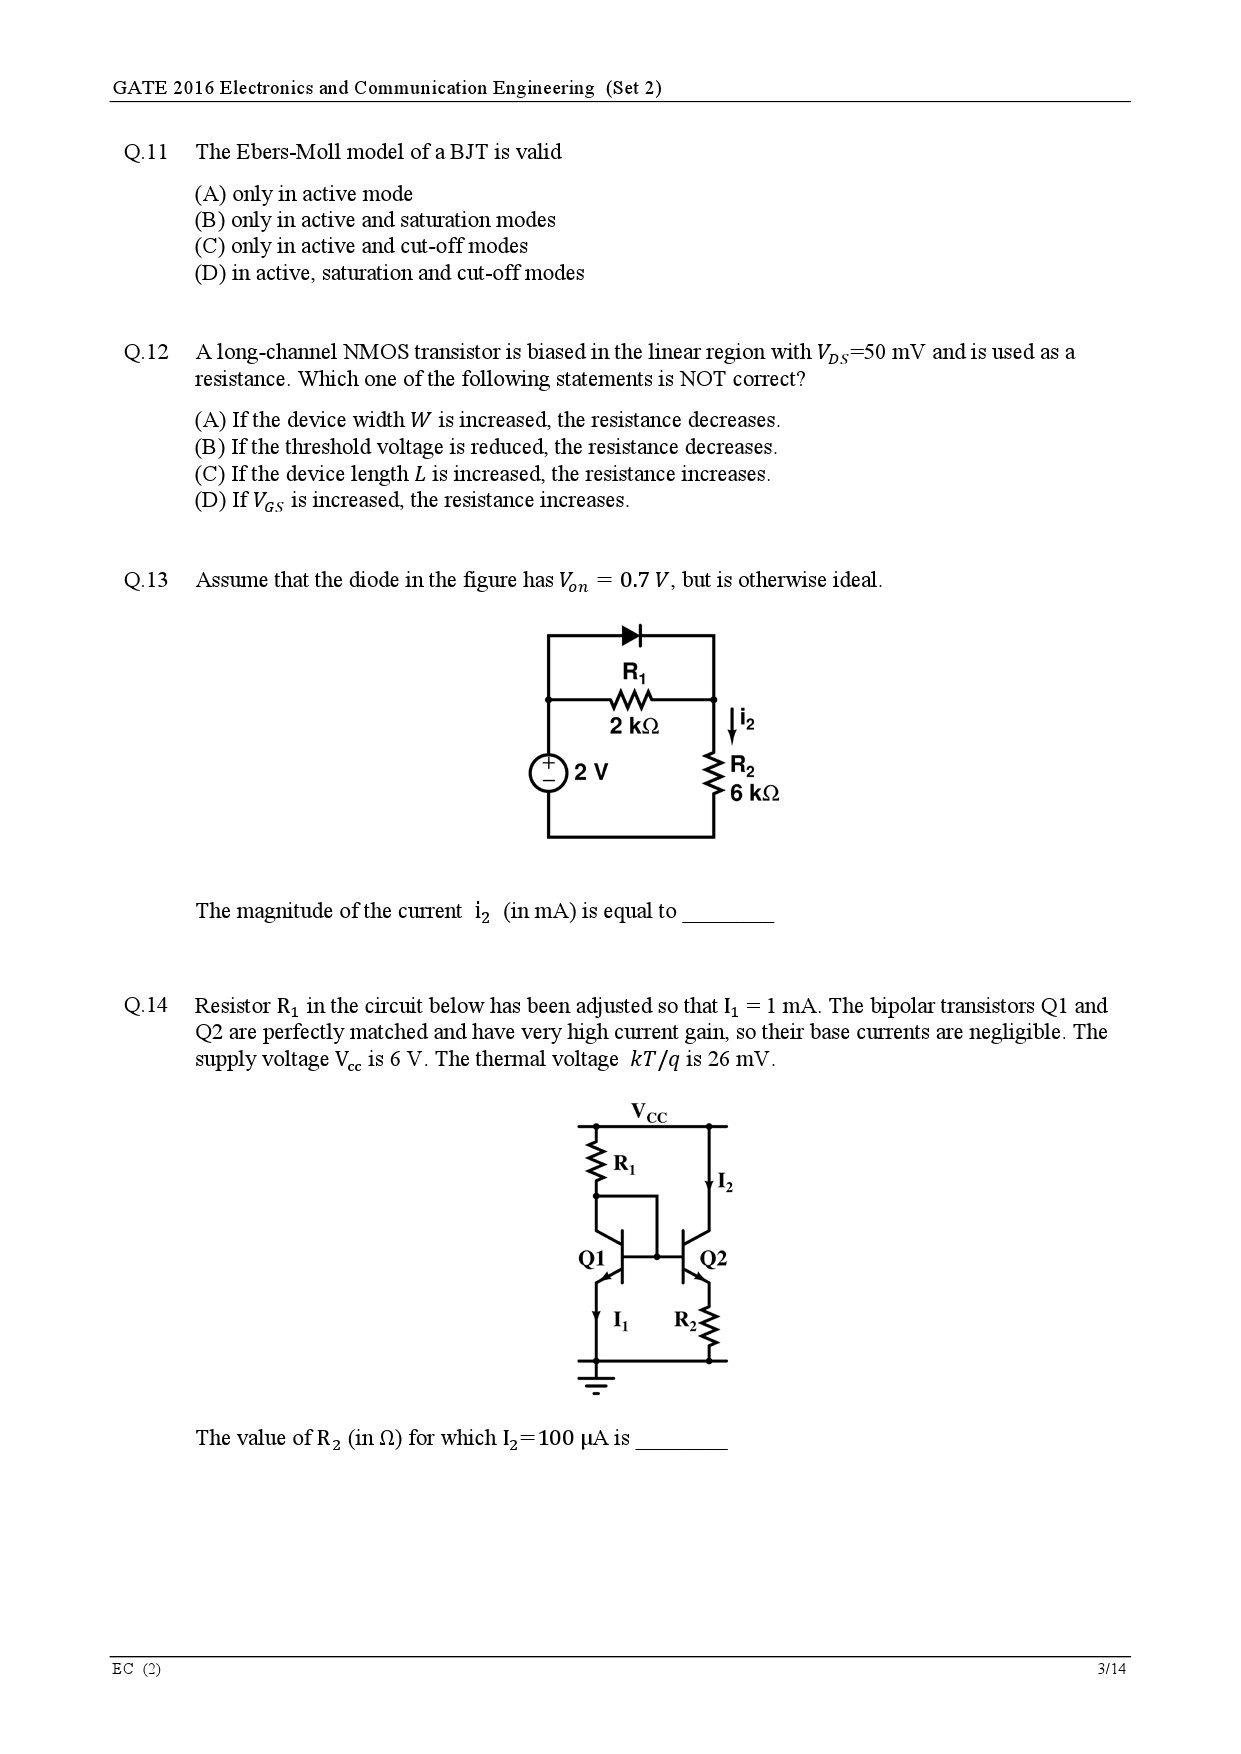 GATE Exam Question Paper 2016 Electronics and Communication Engineering Set 2 6